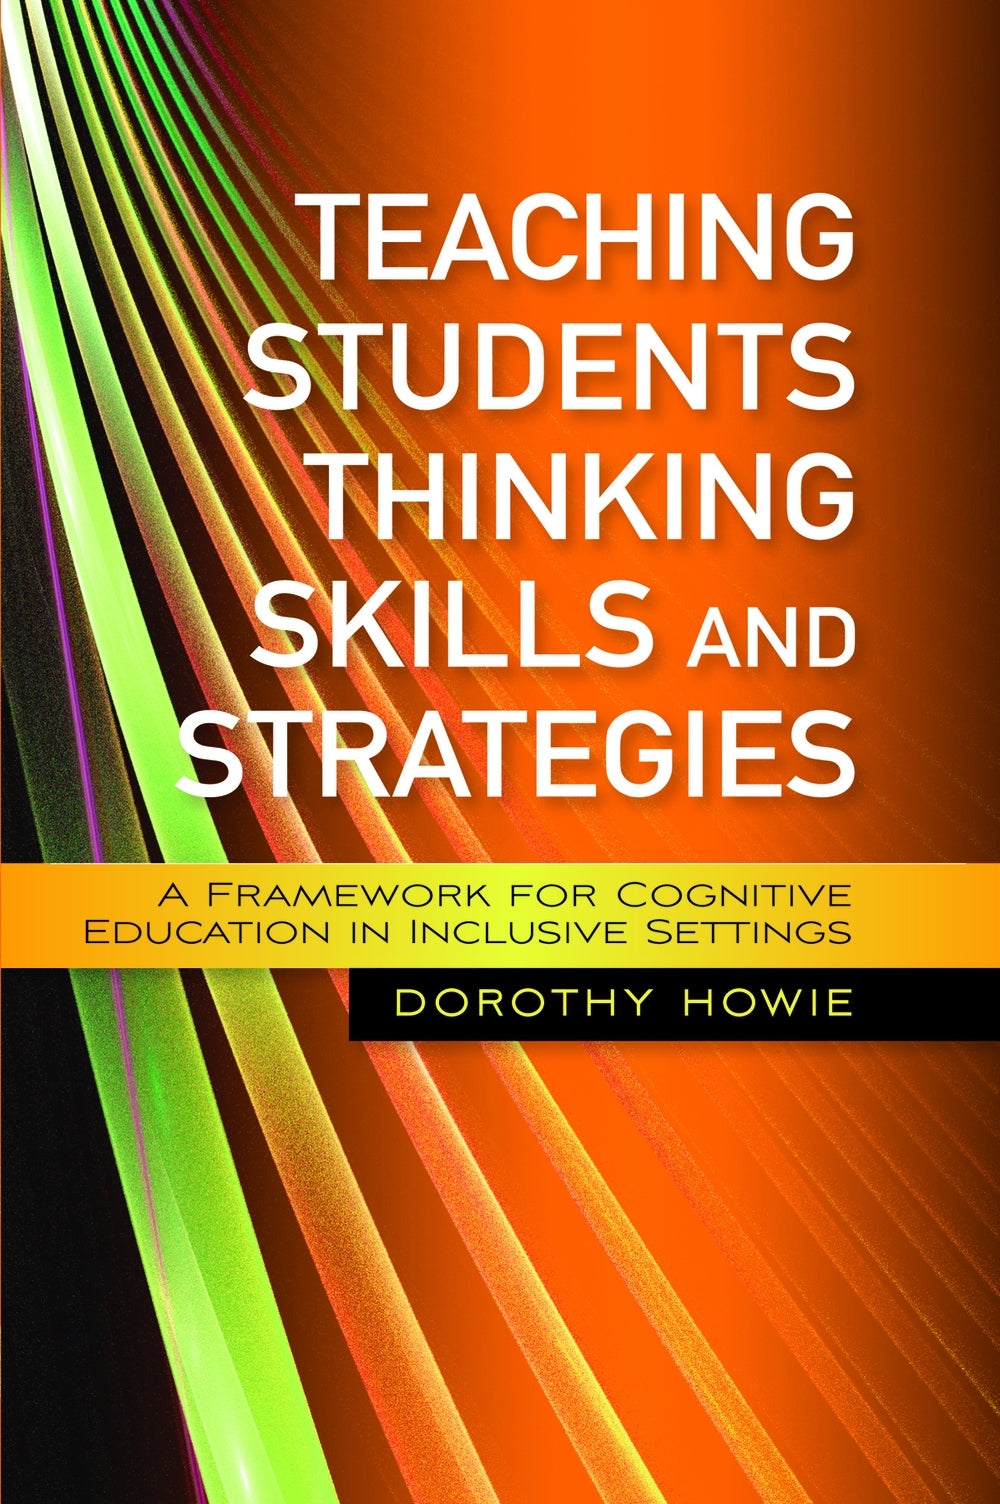 Teaching Students Thinking Skills and Strategies by Dorothy Howie